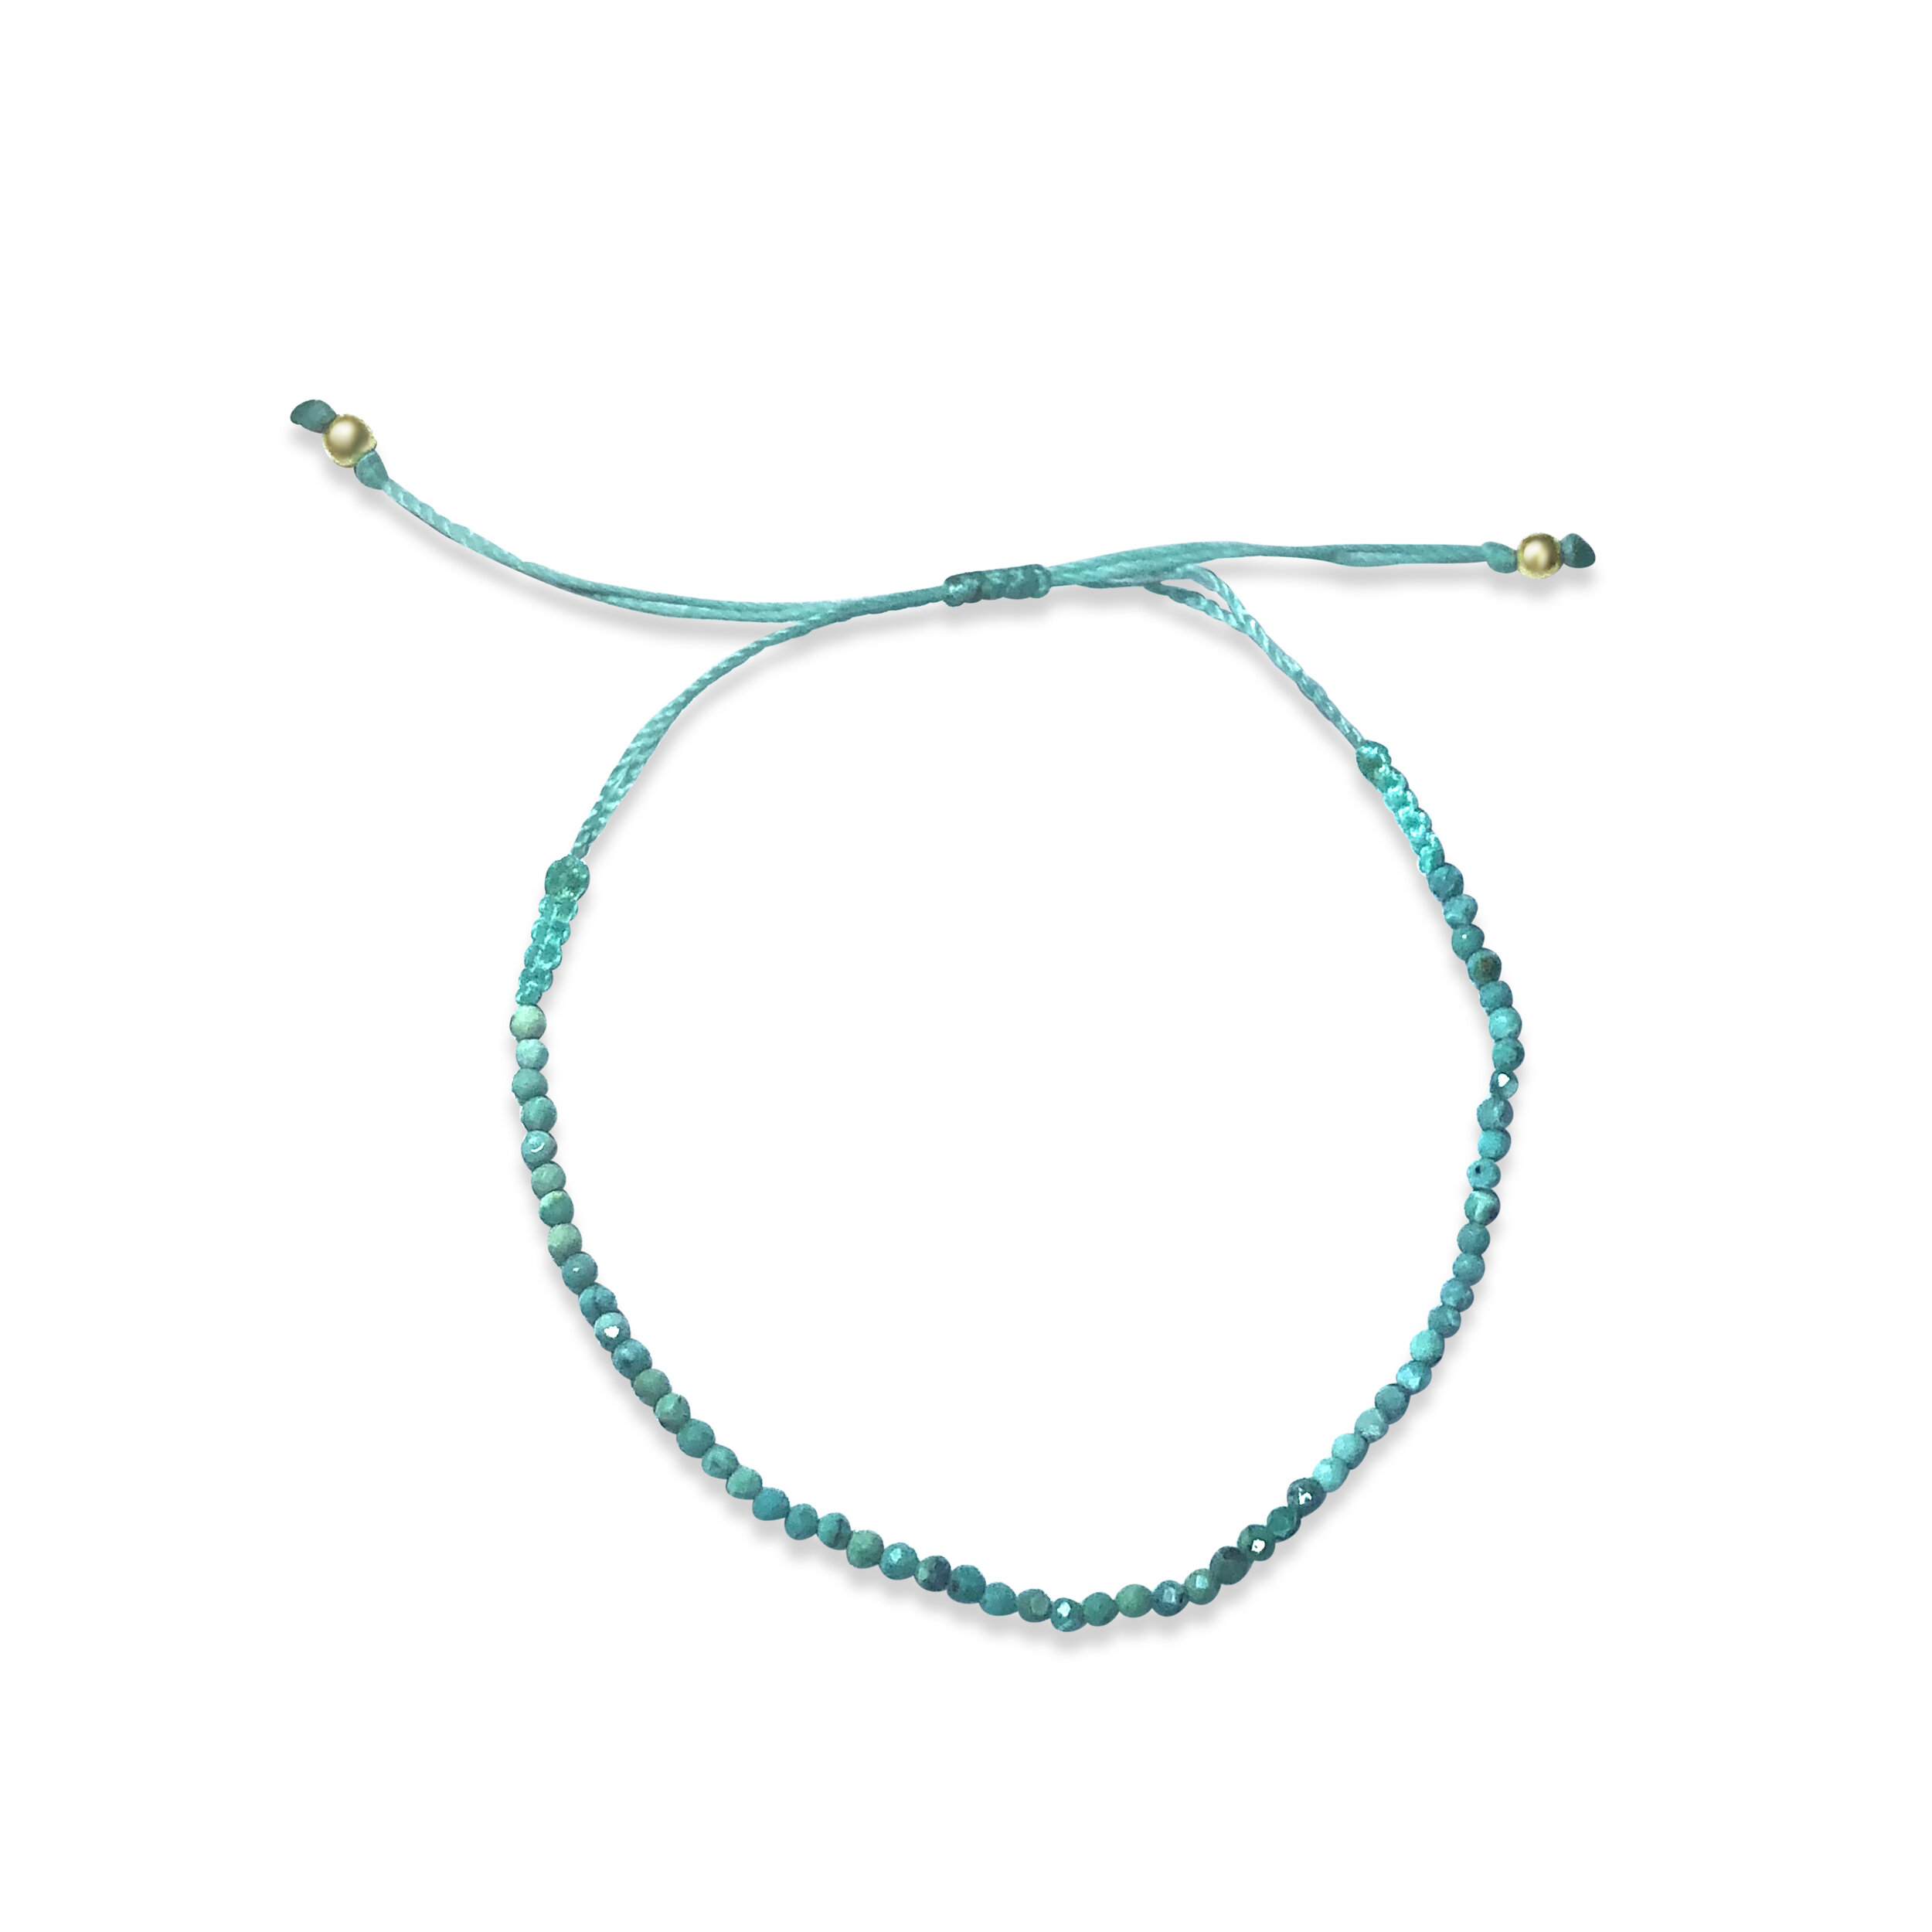 Atelier All Day Turquoise Stackable String Bracelets $39